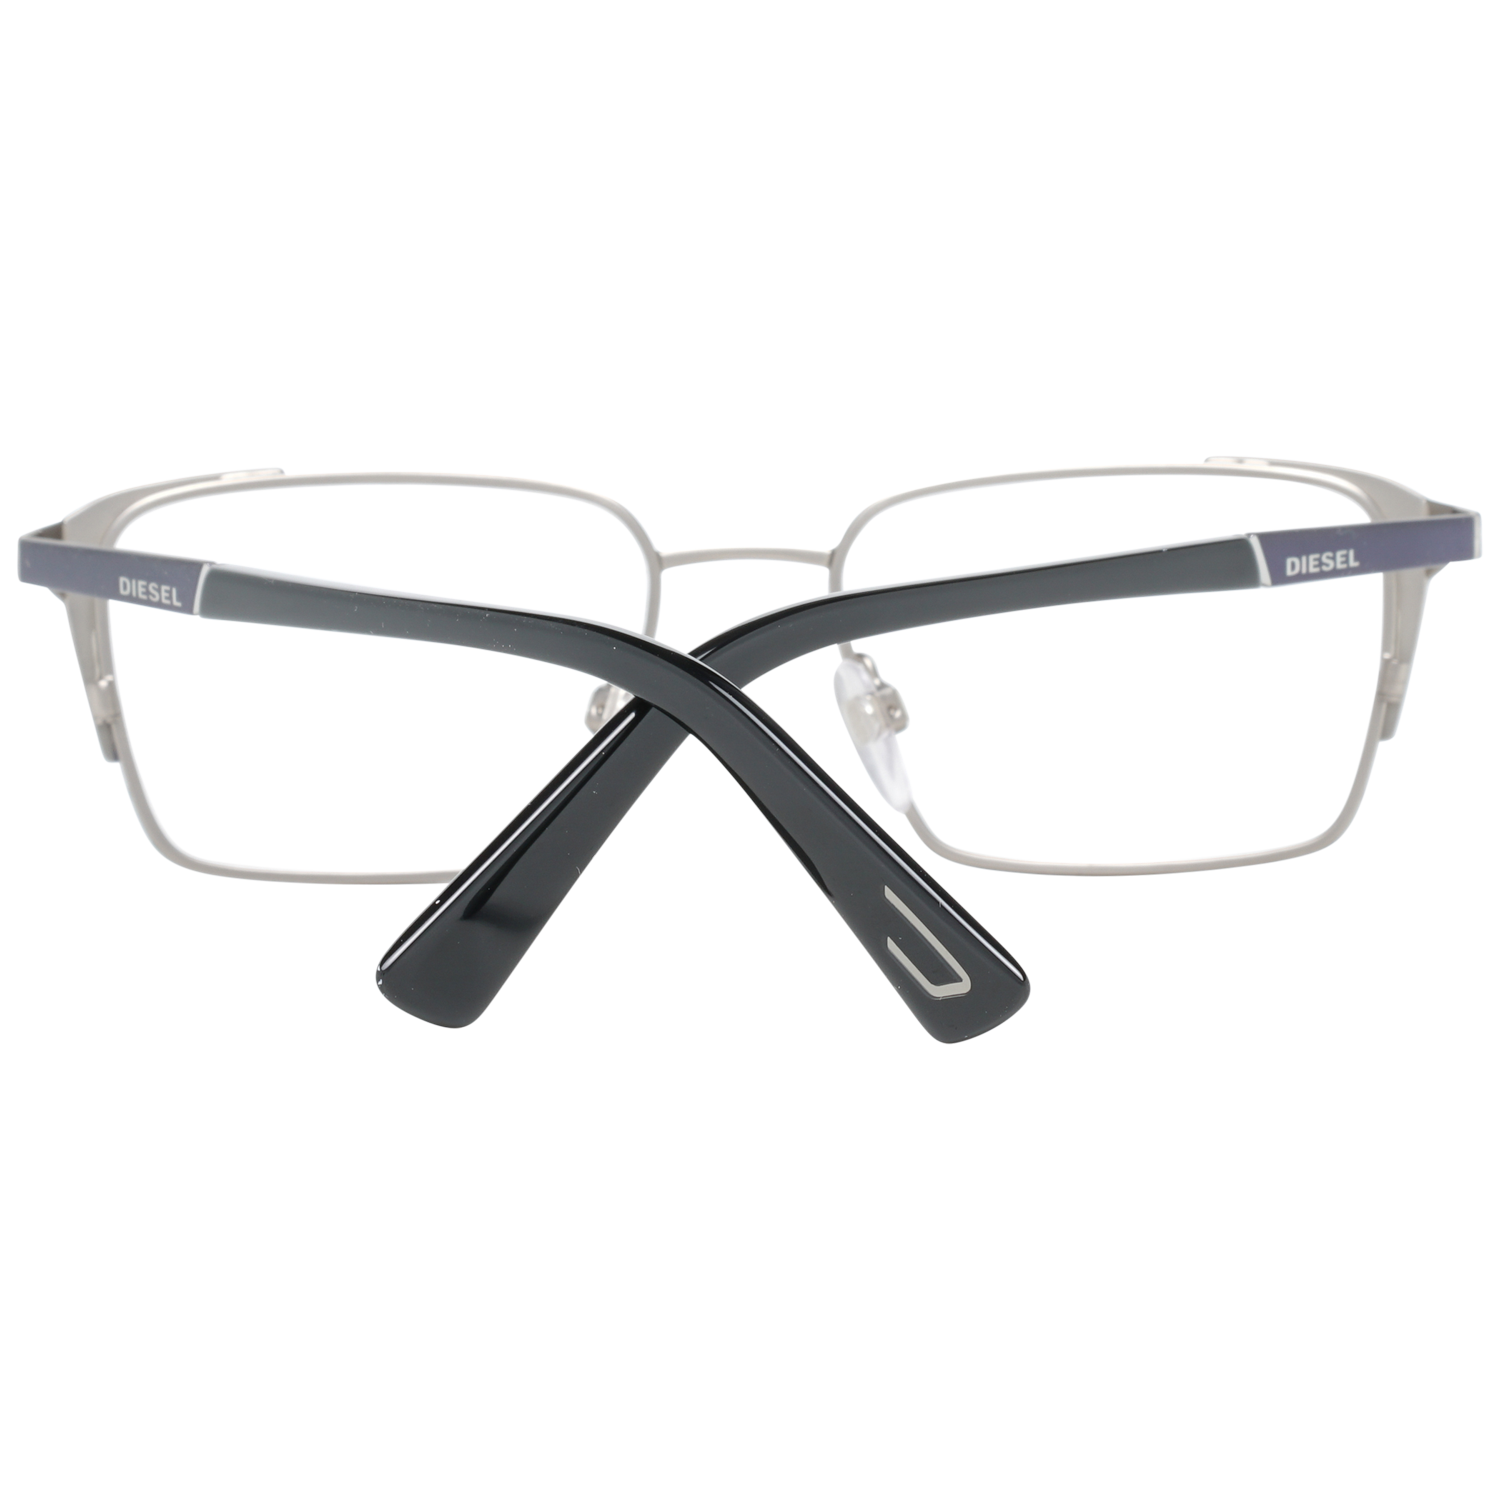 GenderMenMain colorBlueFrame colorBlueFrame materialMetalSize51-17-145Lenses width51mmLenses heigth35mmBridge length17mmFrame width135mmTemple length145mmShipment includesCase, Cleaning clothStyleFull-RimSpring hingeYes